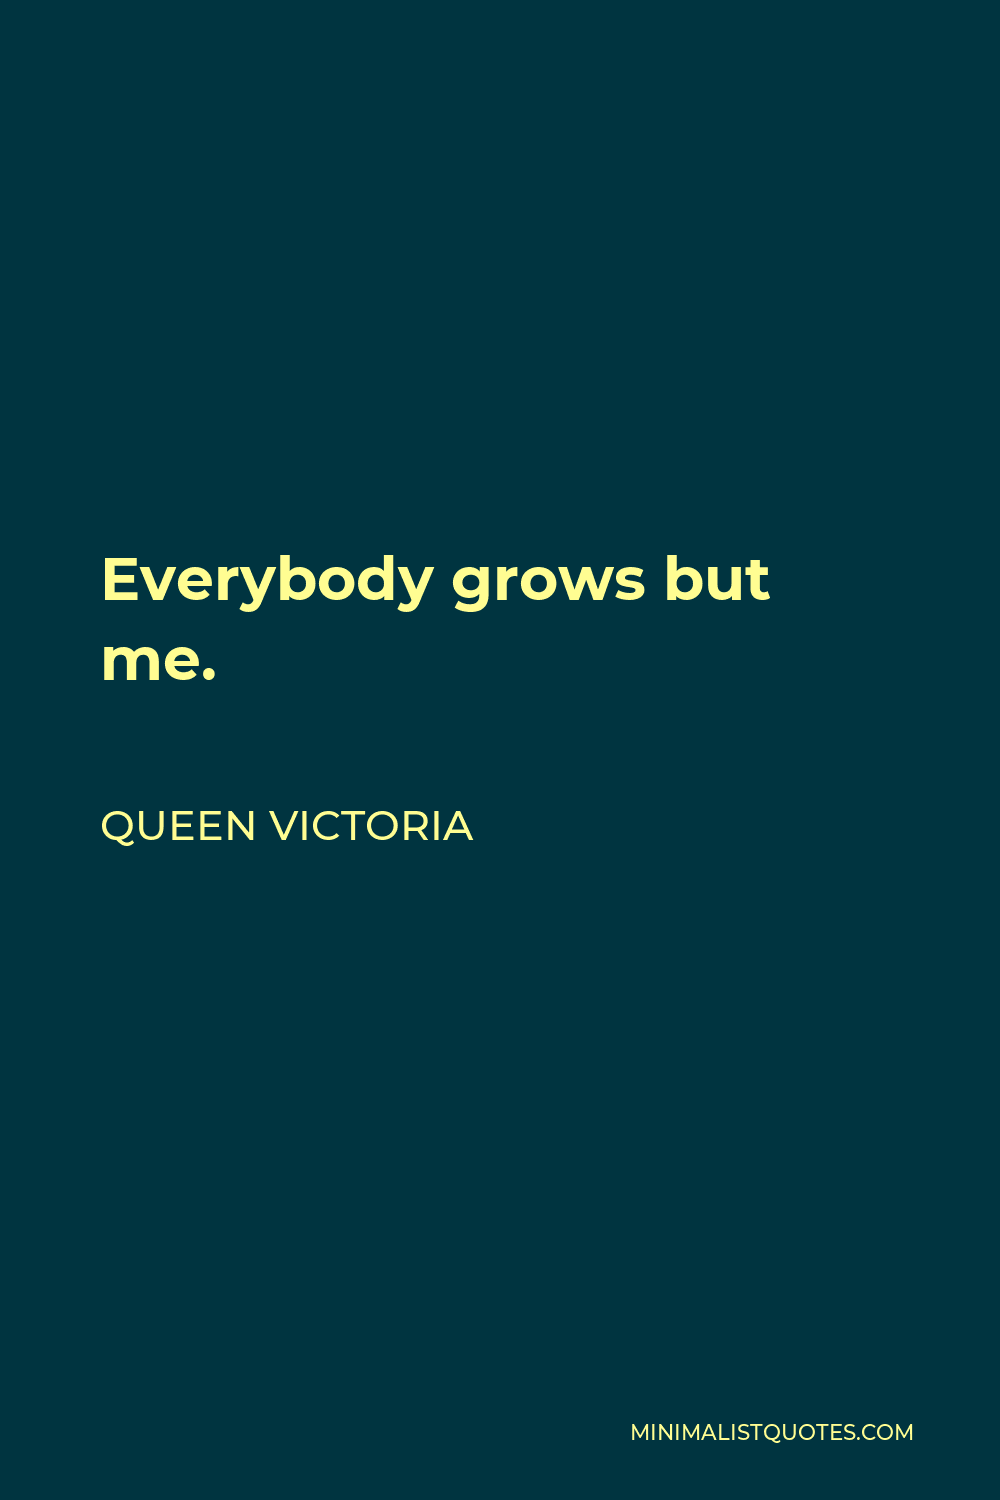 Queen Victoria Quote - Everybody grows but me.